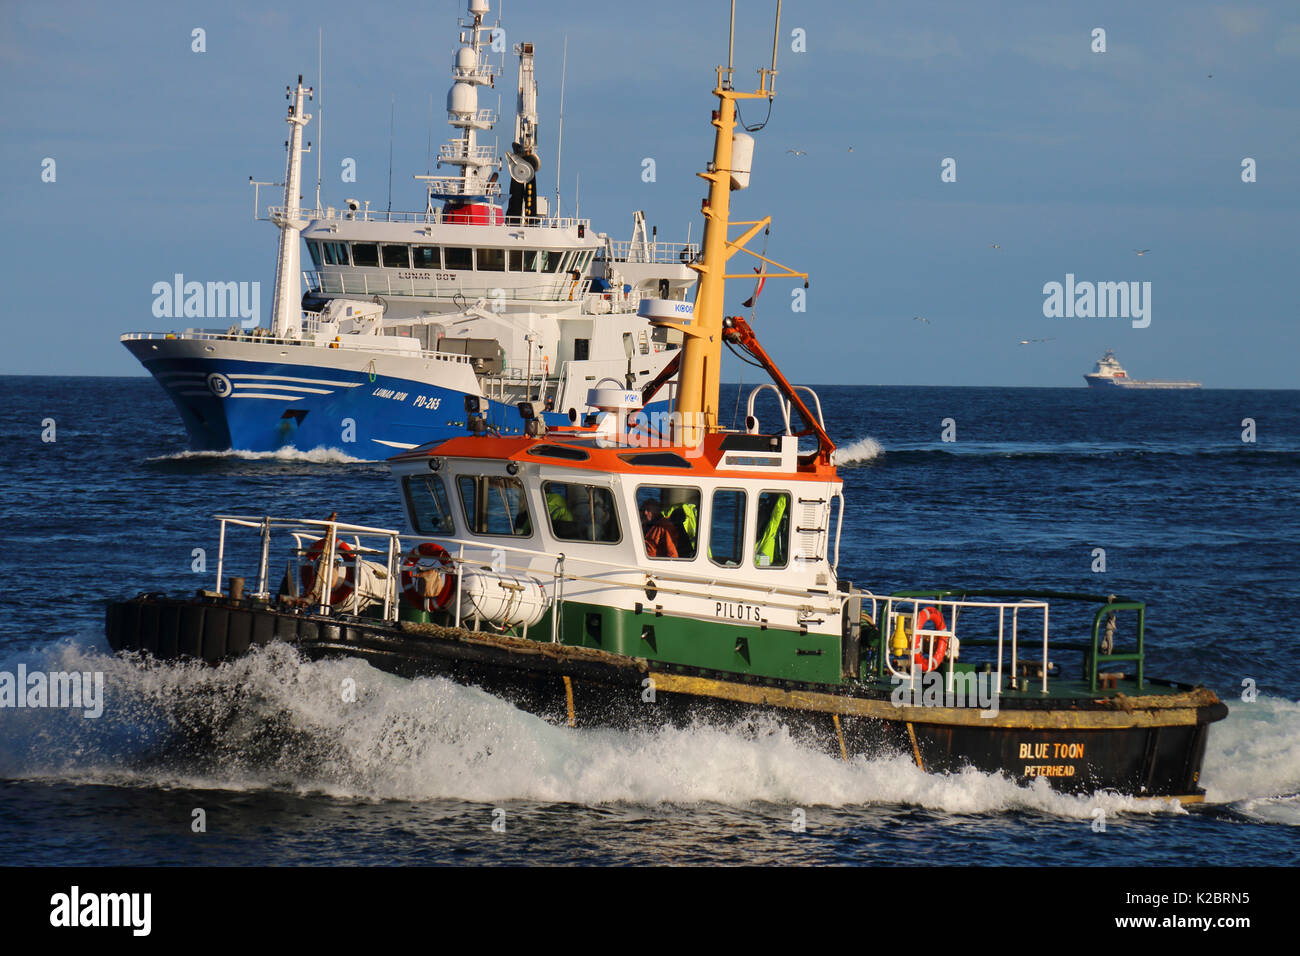 Peterhead pilot vessel and  Pelagic fishing vessel 'Lunar Bow', October 2014.  All non-editorial uses must be cleared individually. Stock Photo